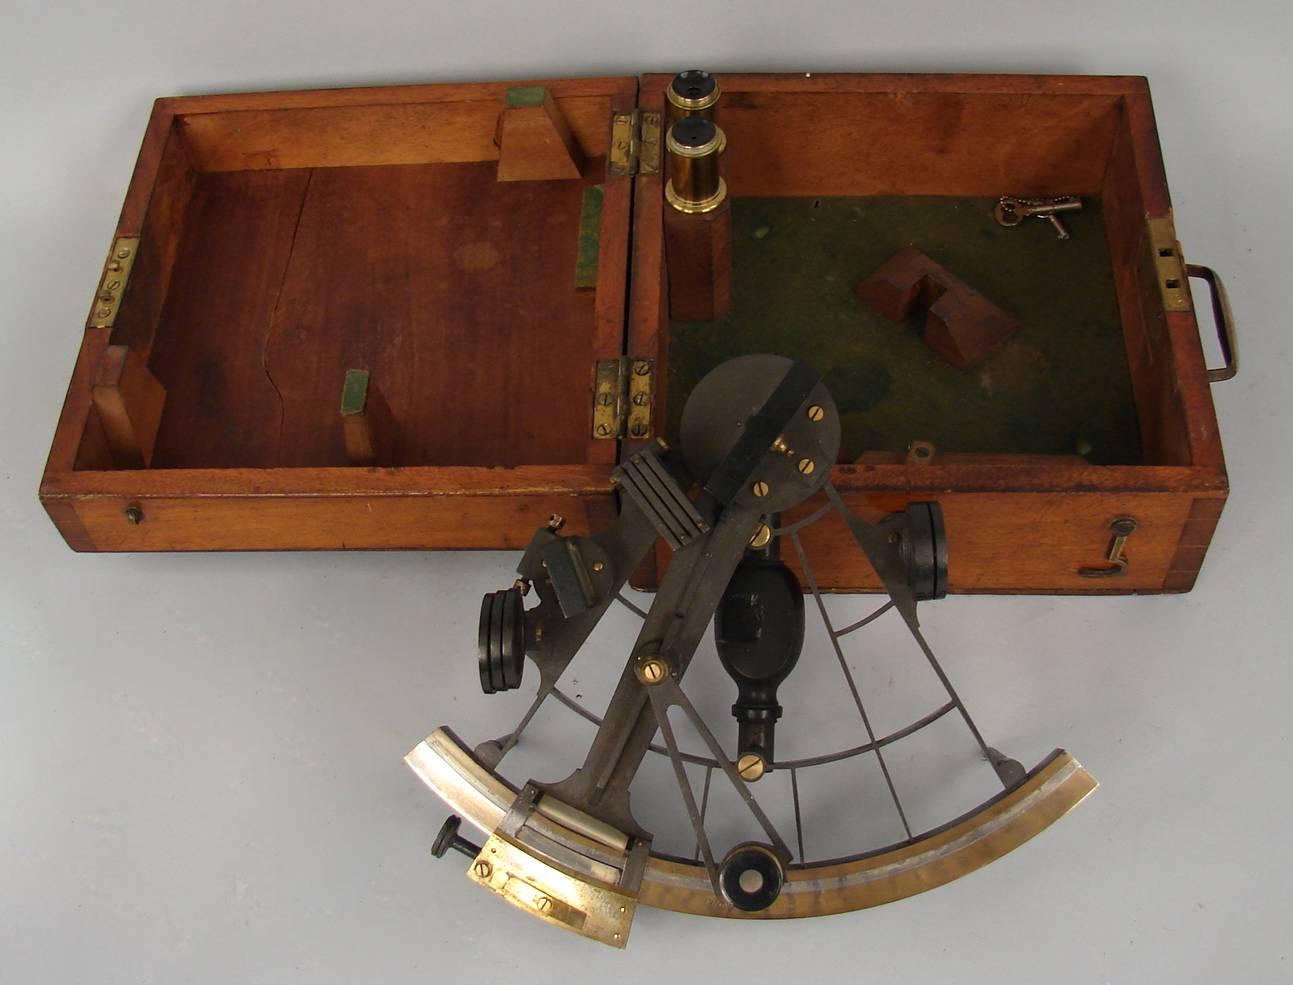 An English bronze and silver sextant made and signed by Elliott Brothers, London, circa 1890. With accessories and its original mahogany case with key.